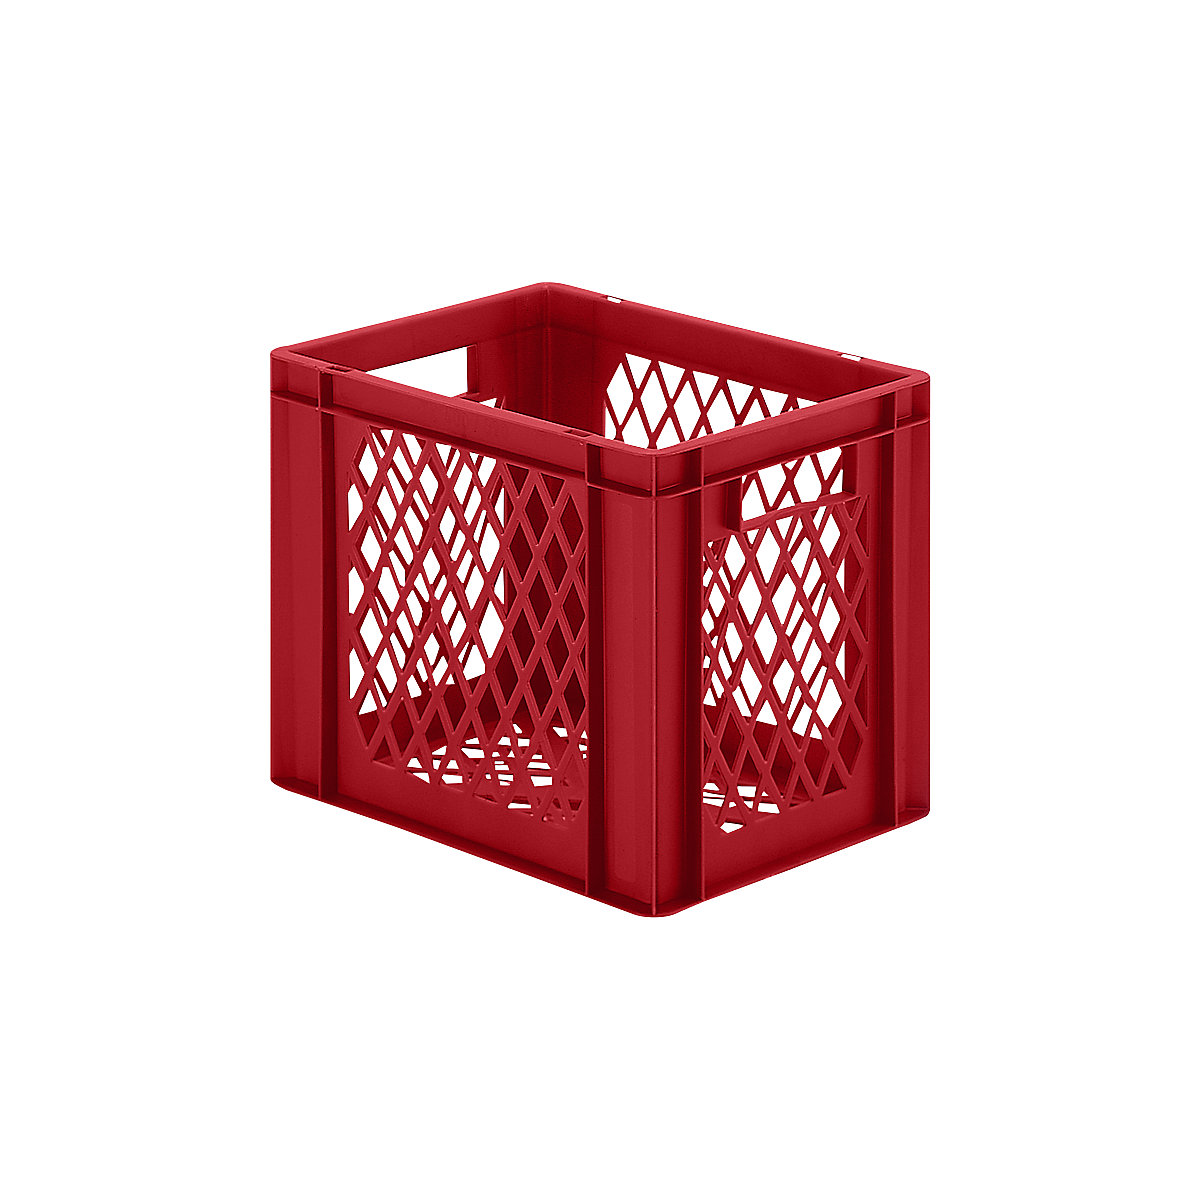 Euro stacking container, perforated walls and base